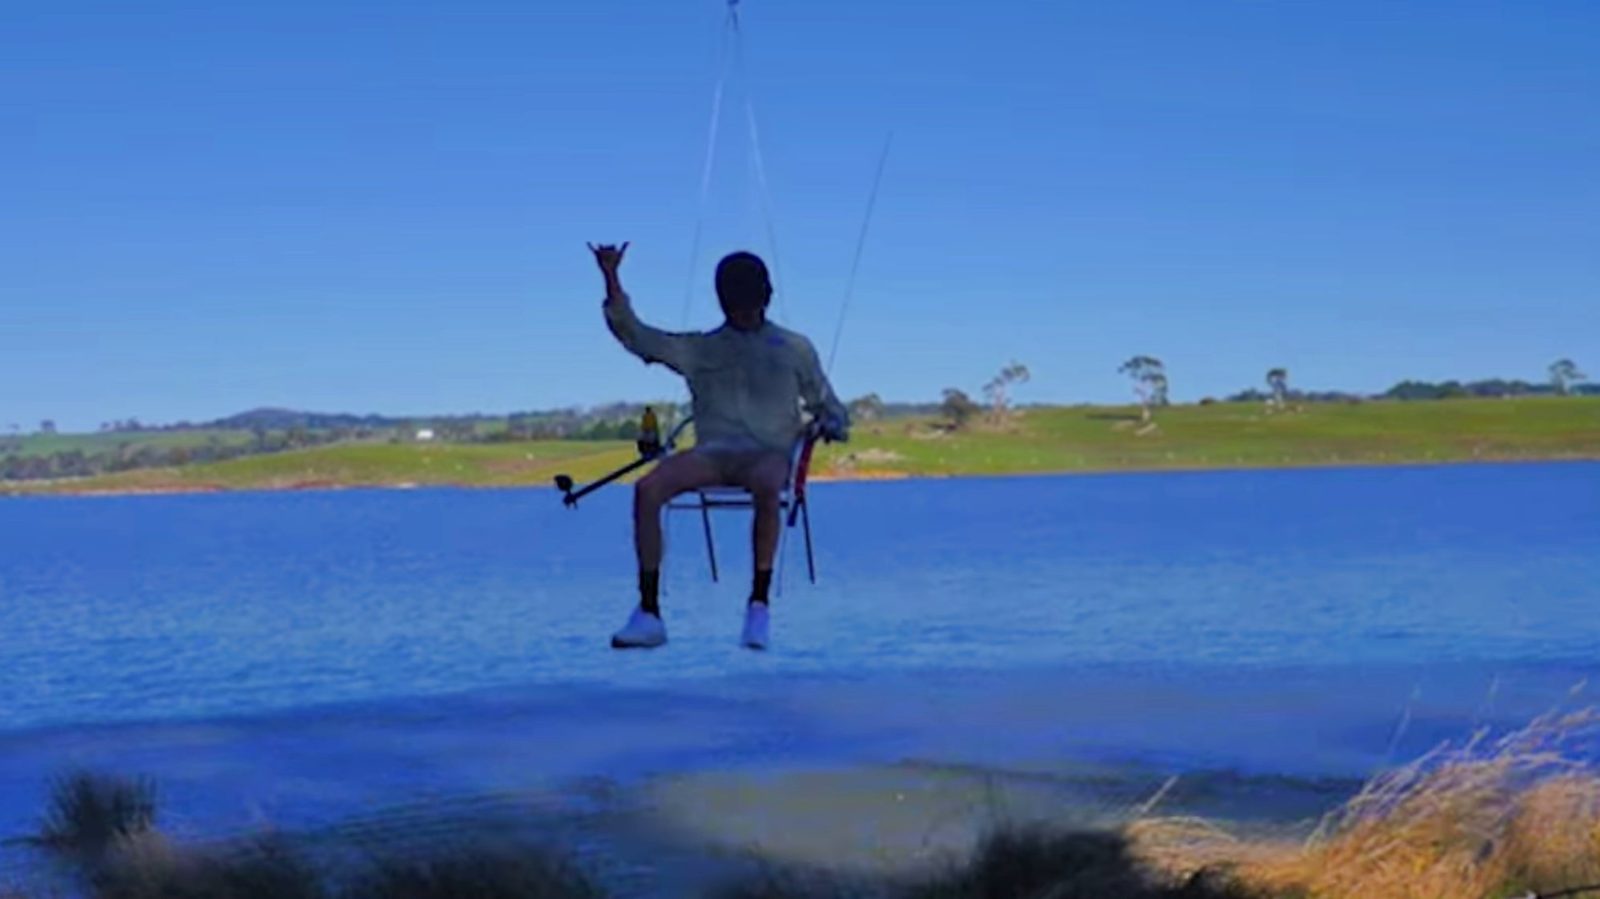 Aussie man takes drone fishing to new highs - CASA investigates